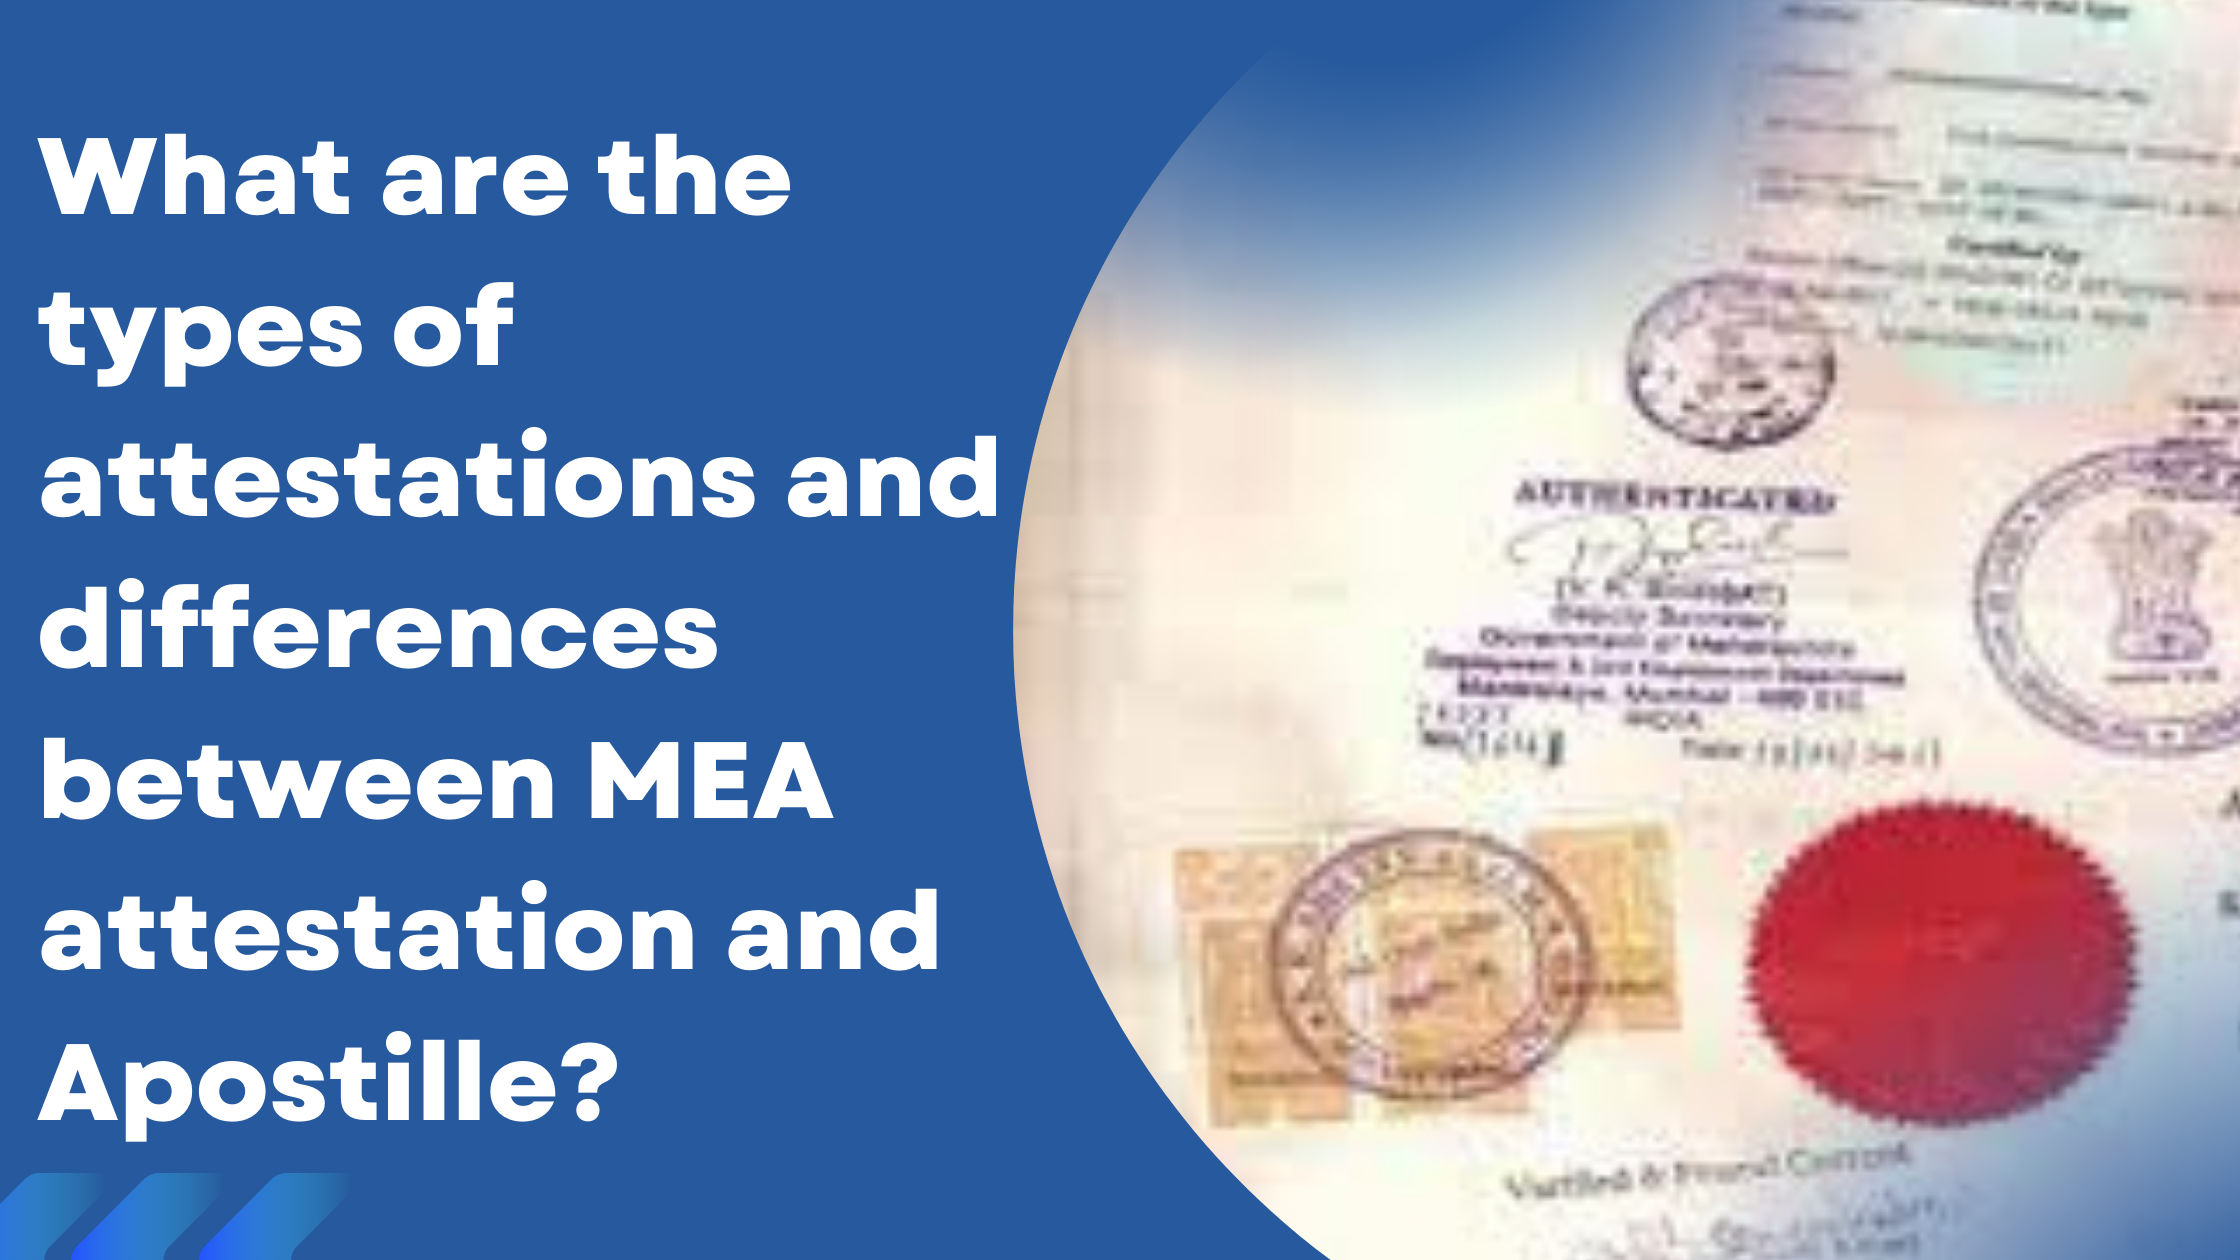 What are the types of attestations and differences between MEA attestation and Apostille?